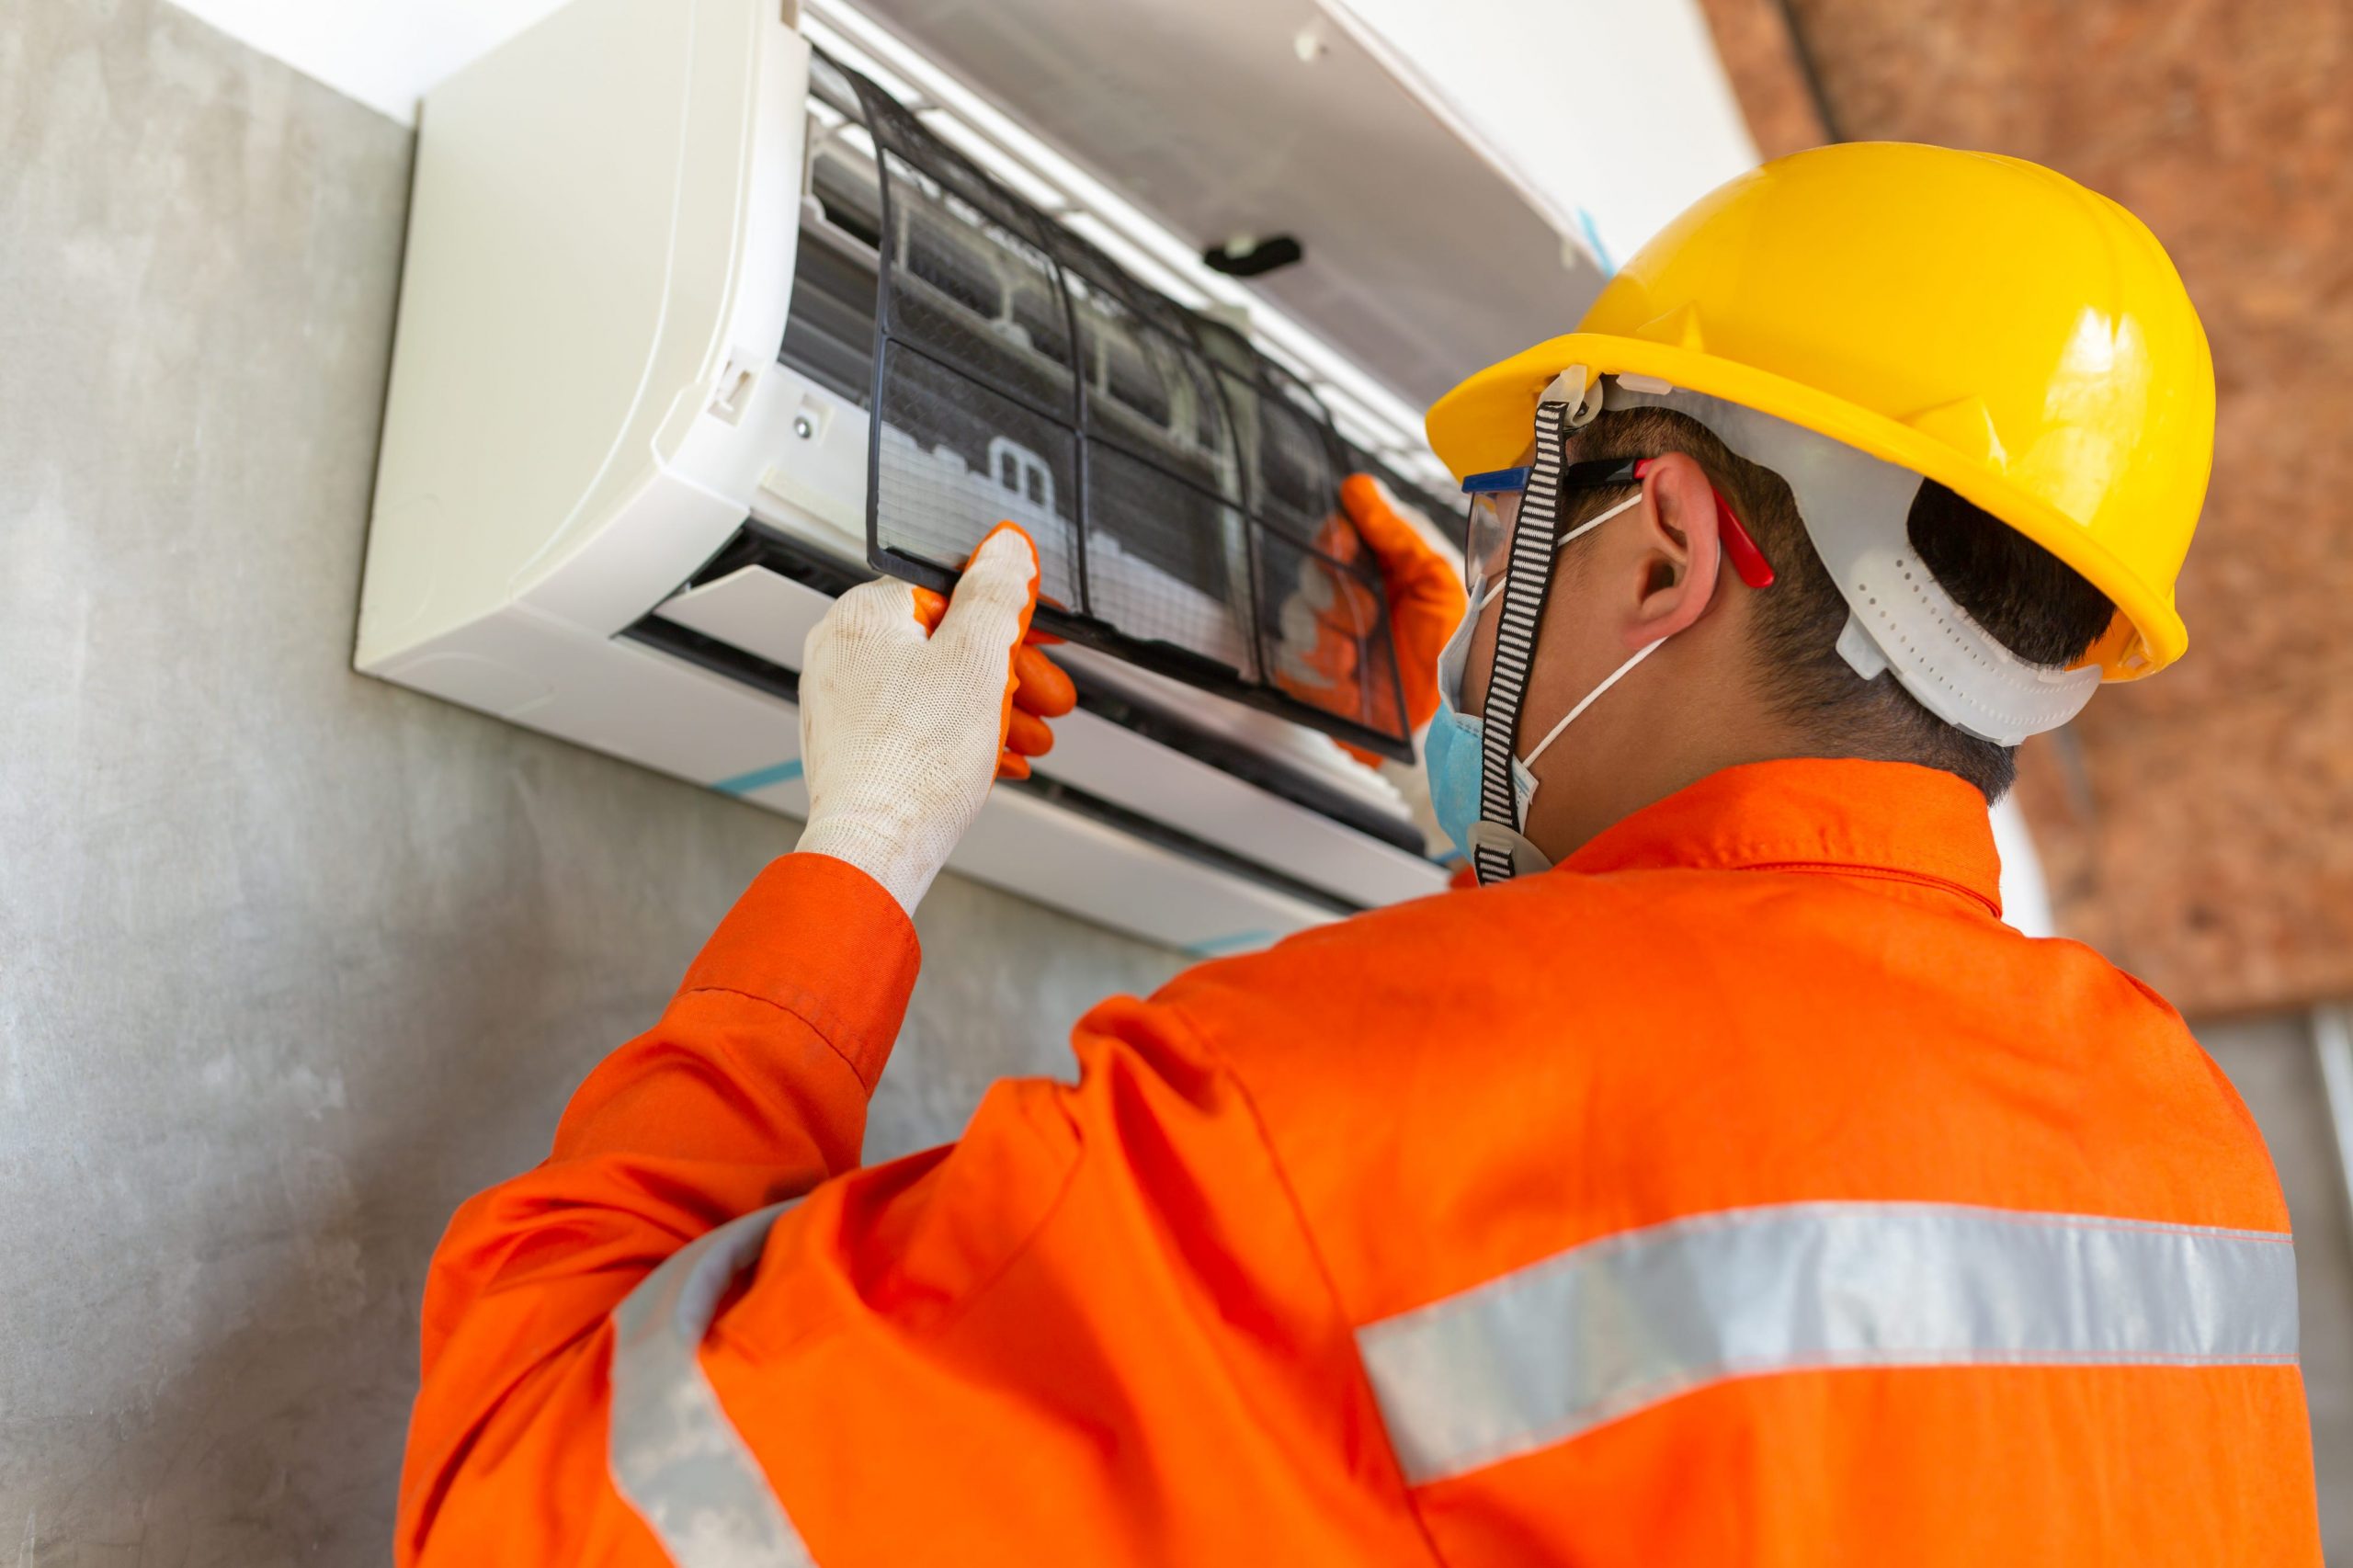 A technician instals an air conditioning unit in a house wearing a bright orange jacket.